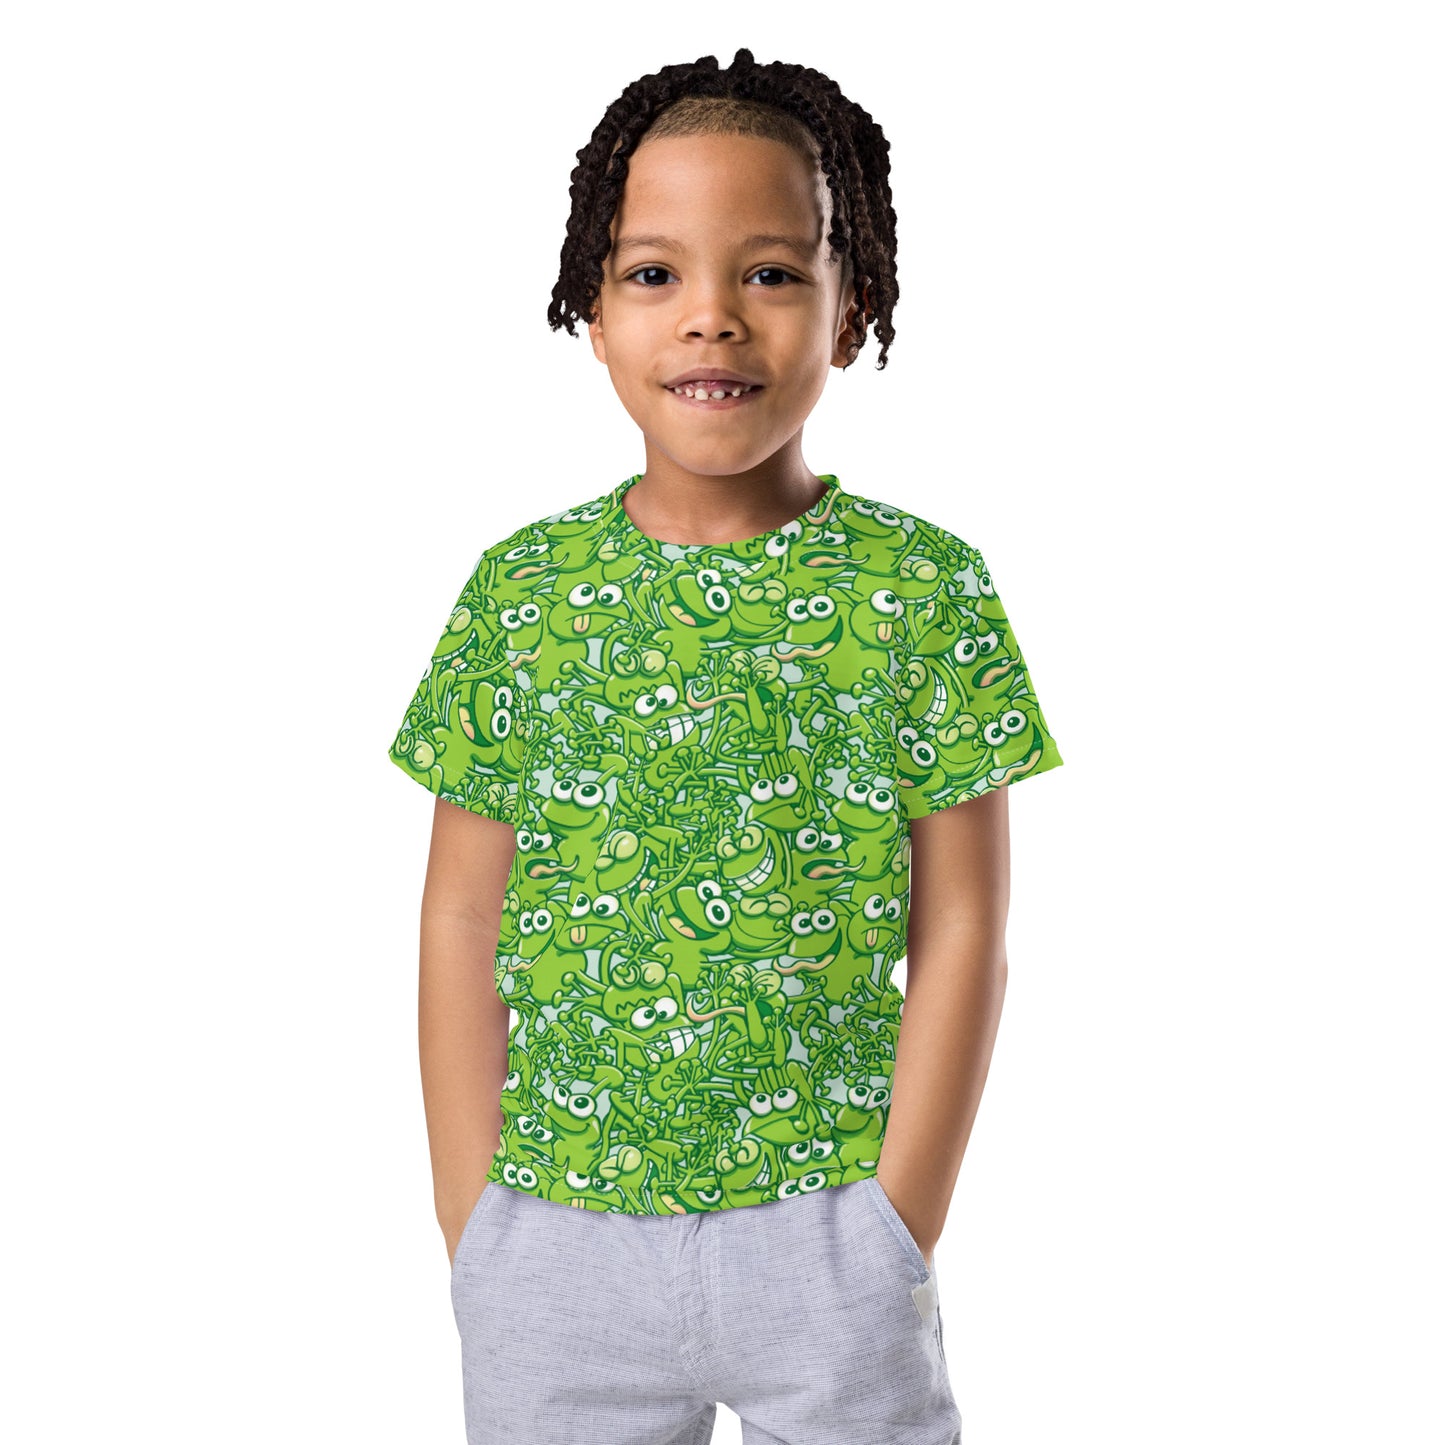 A tangled army of happy green frogs appears when the rain stops Kids crew neck t-shirt. Front view